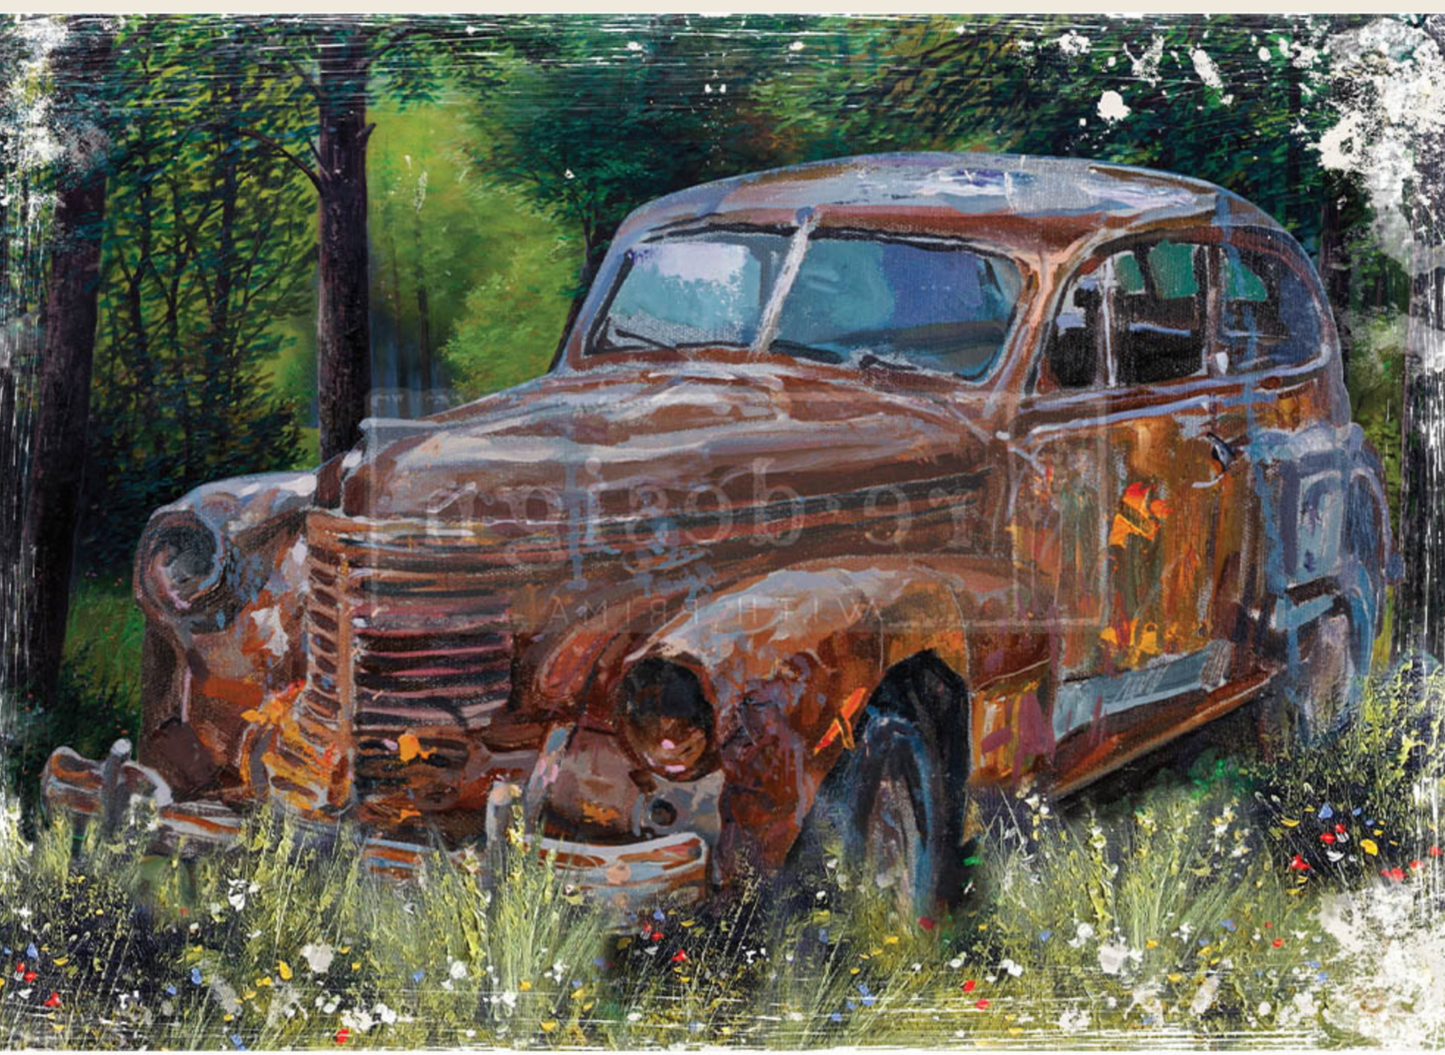 A1 Decoupage Rice Paper (Mulberry Tissue Paper) – This Rusty Car